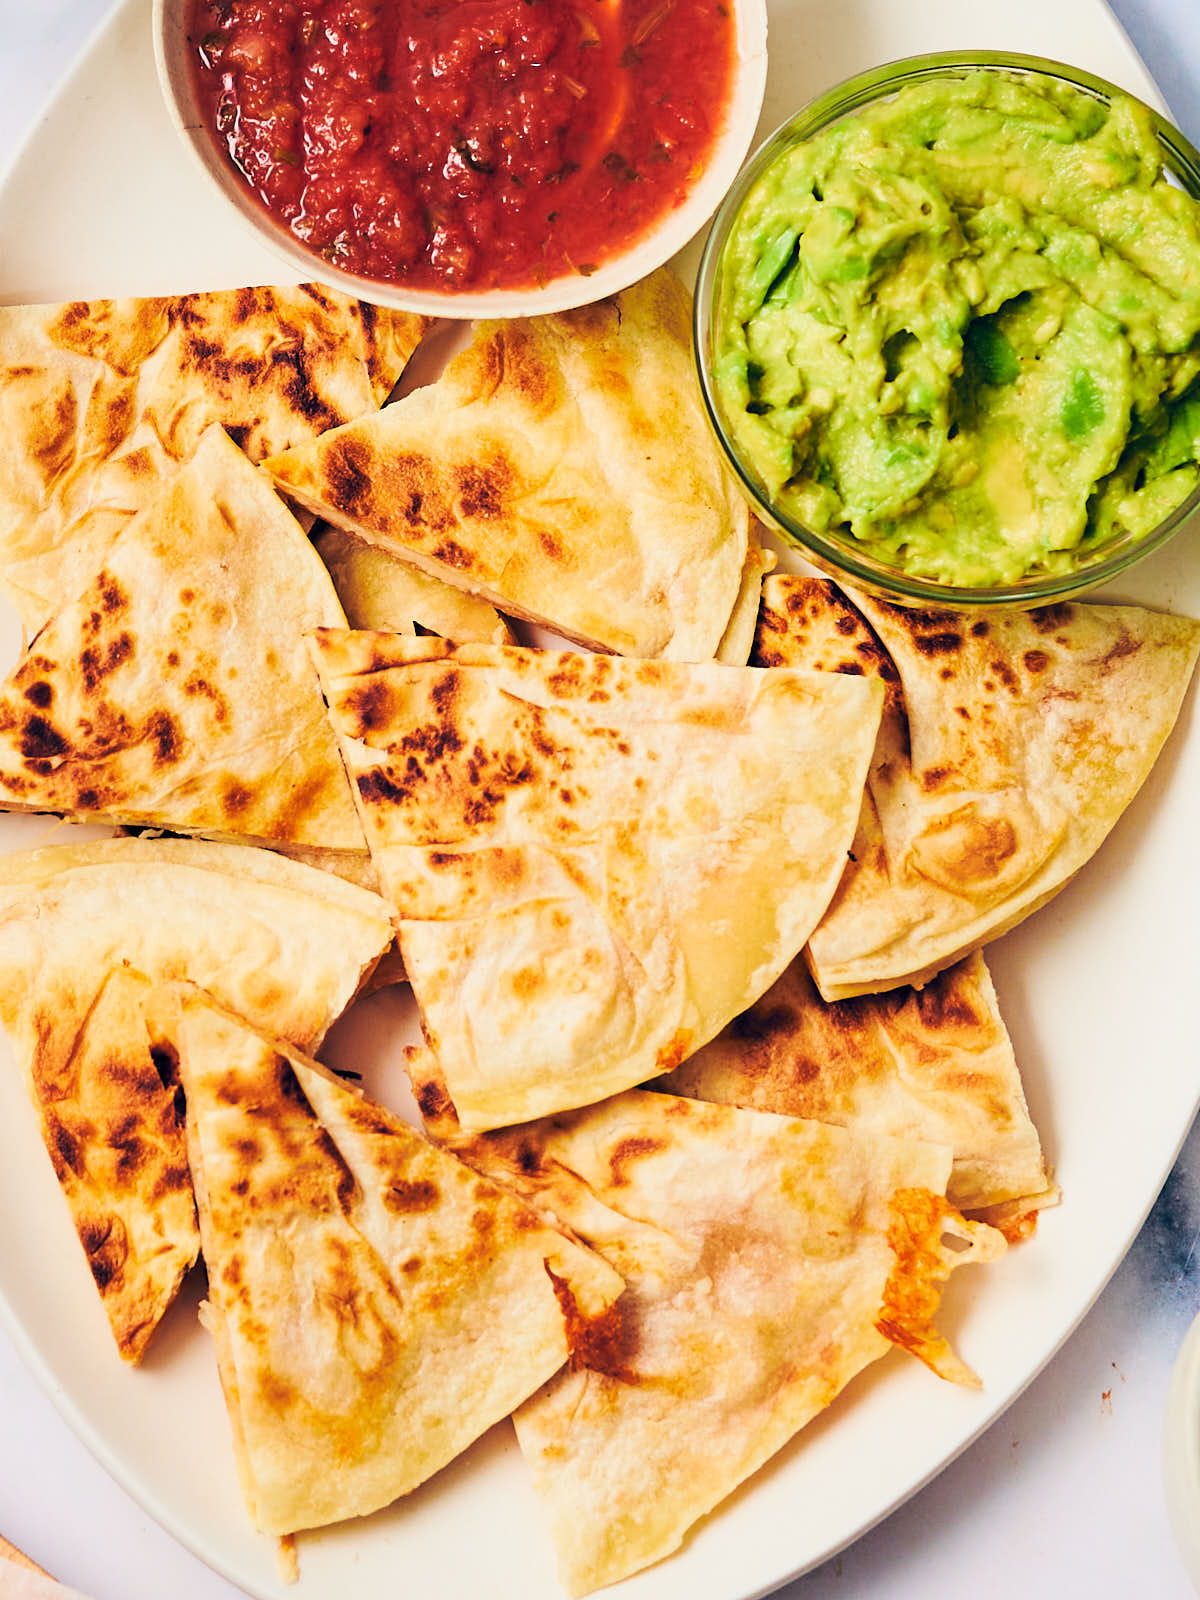 The best cheese quesadillas on a plate with guacamole and salsa.